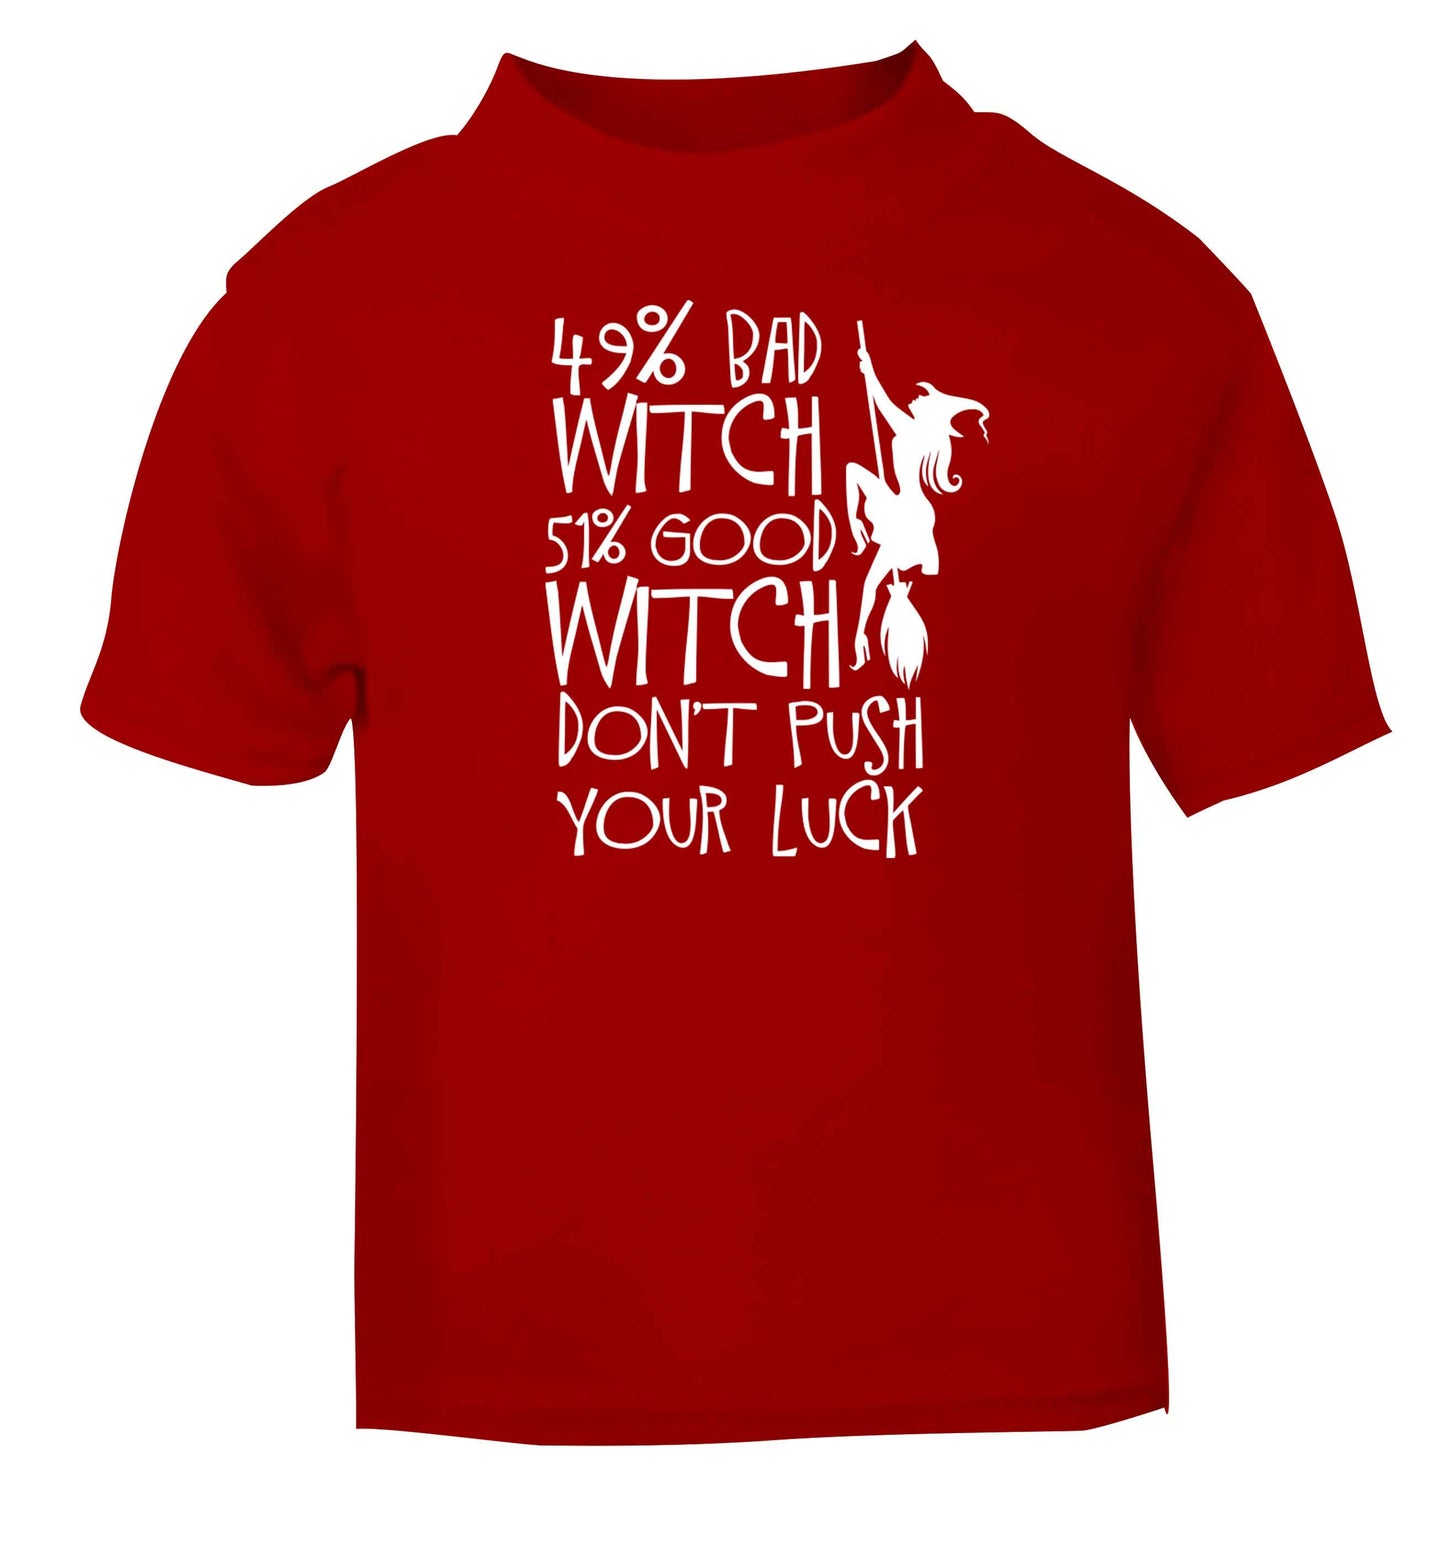 49% bad witch 51% good witch don't push your luck red baby toddler Tshirt 2 Years